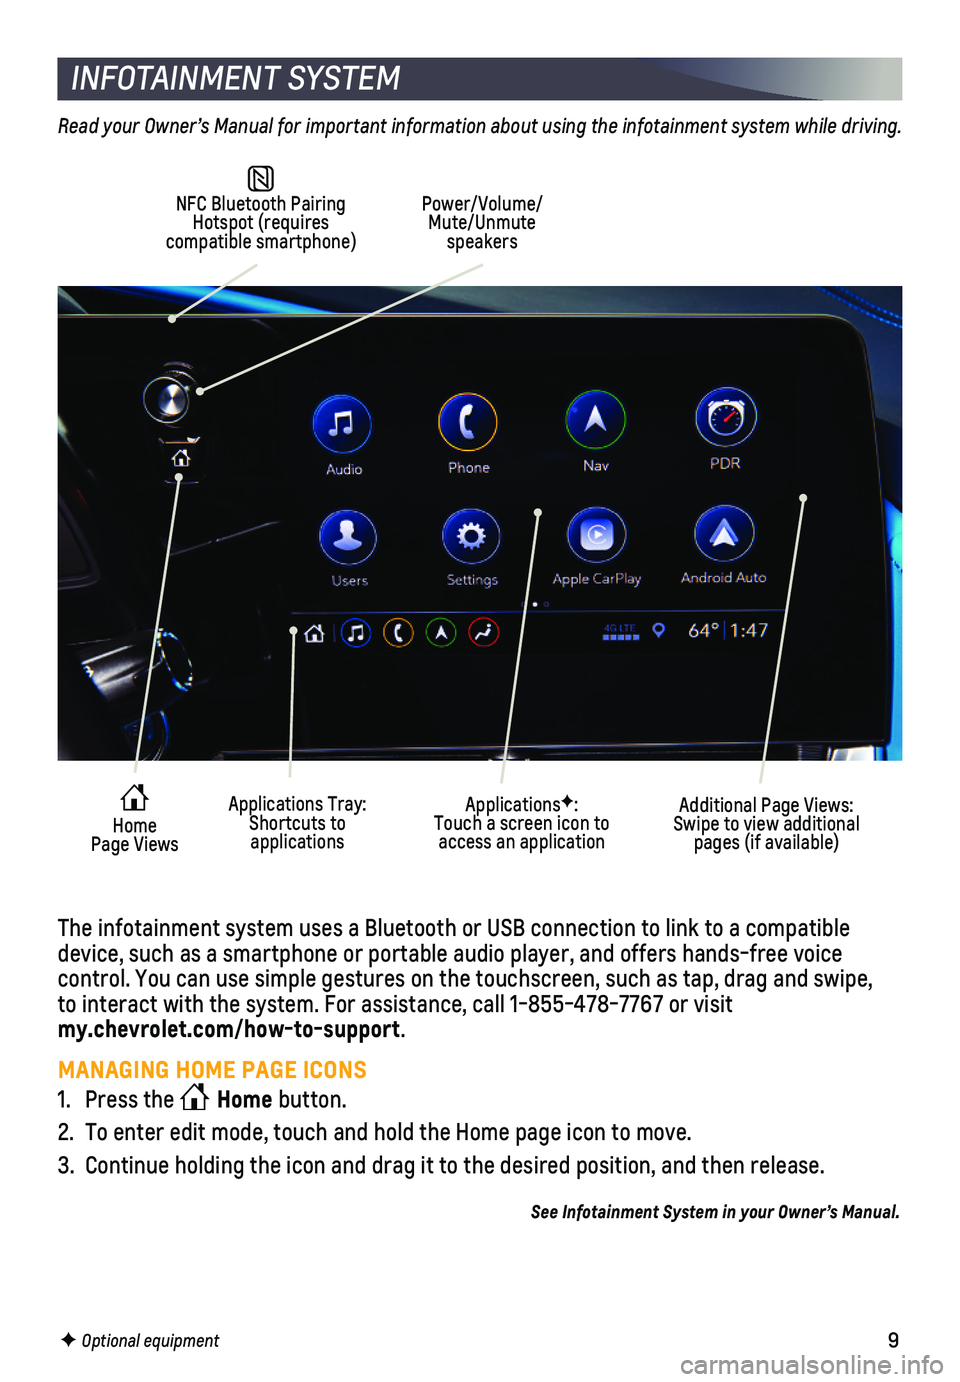 CHEVROLET CORVETTE 2021  Get To Know Guide 9
INFOTAINMENT SYSTEM
F Optional equipment
 NFC Bluetooth Pairing Hotspot (requires compatible smartphone)
Power/Volume/Mute/Unmute speakers
Additional Page Views: Swipe to view additional pages (if a